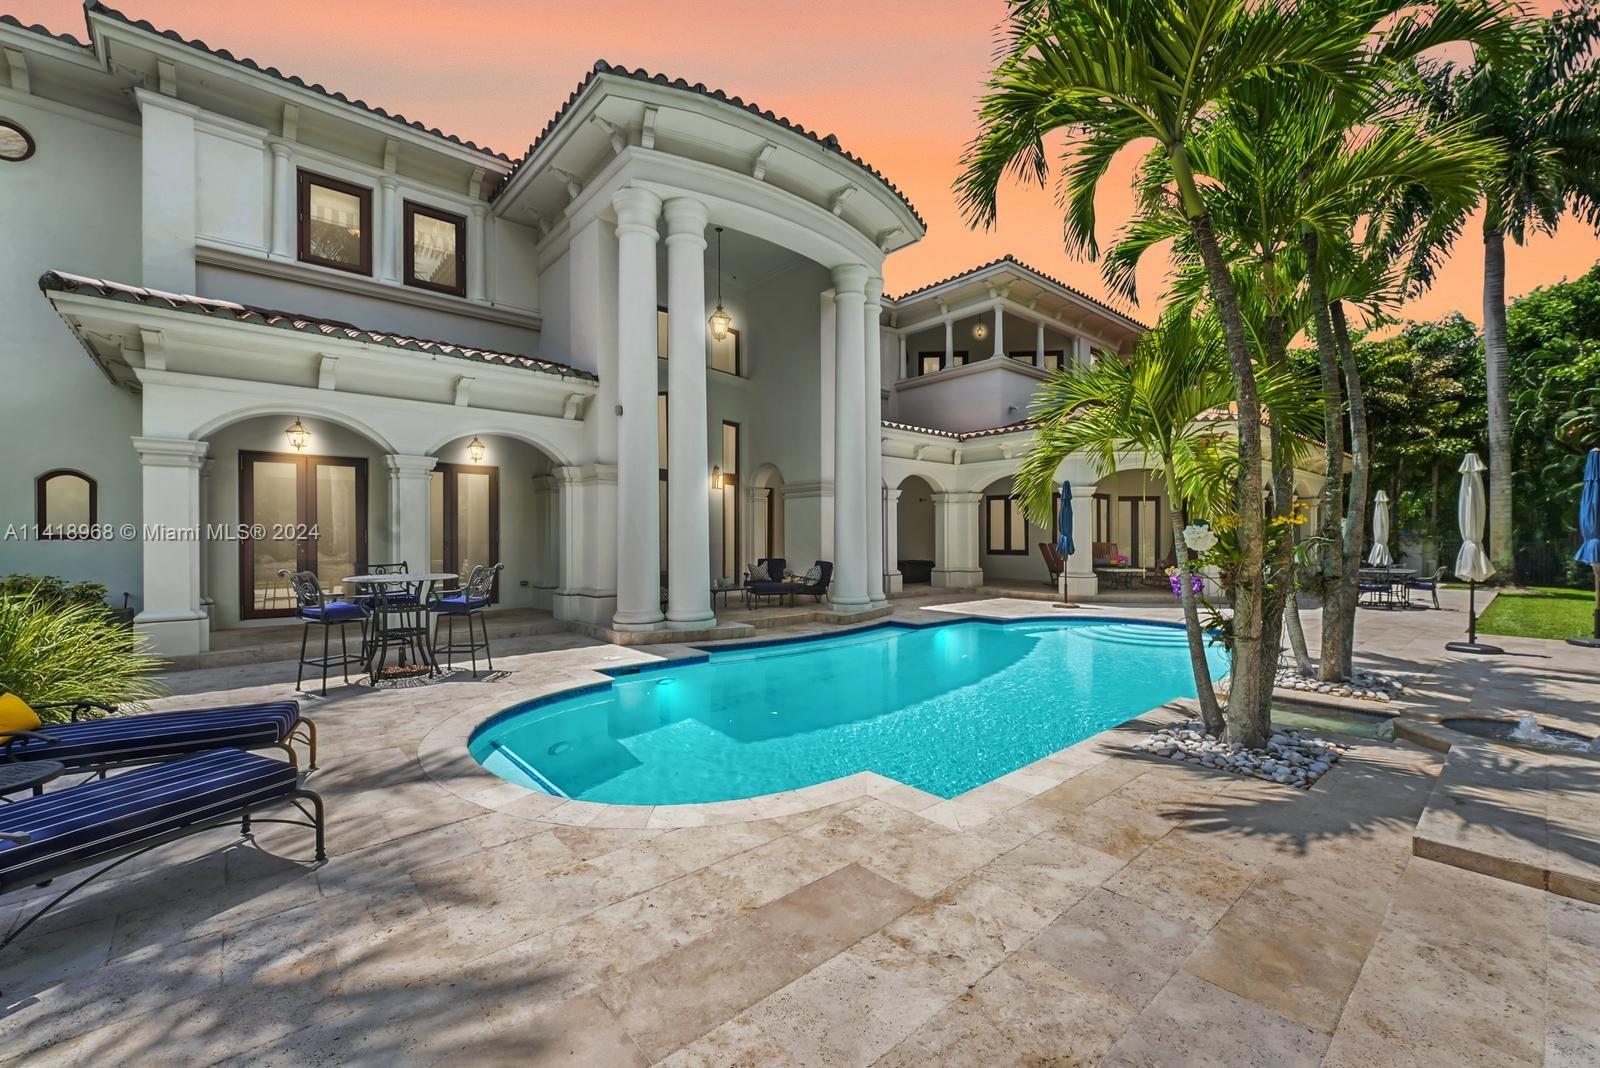 Welcome to Villa di Vista, an exquisite masterpiece in Pinecrest, FL. Custom-built with meticulous craftsmanship, this almost 10,000 sqft estate with elevator exudes refined charm and sophistication. High ceilings and natural light fill the living areas, while the main suite offers a cozy sanctuary with a spa-like bathroom. Outside, enjoy the private oasis with a stately pool, covered patio, and outdoor entertainment area. Pinecrest provides access to renowned schools, upscale shopping, and fine dining. Experience luxury living and exclusivity at Villa di Vista. Tour it today and let this magnificent home capture your heart. Make it Rein!